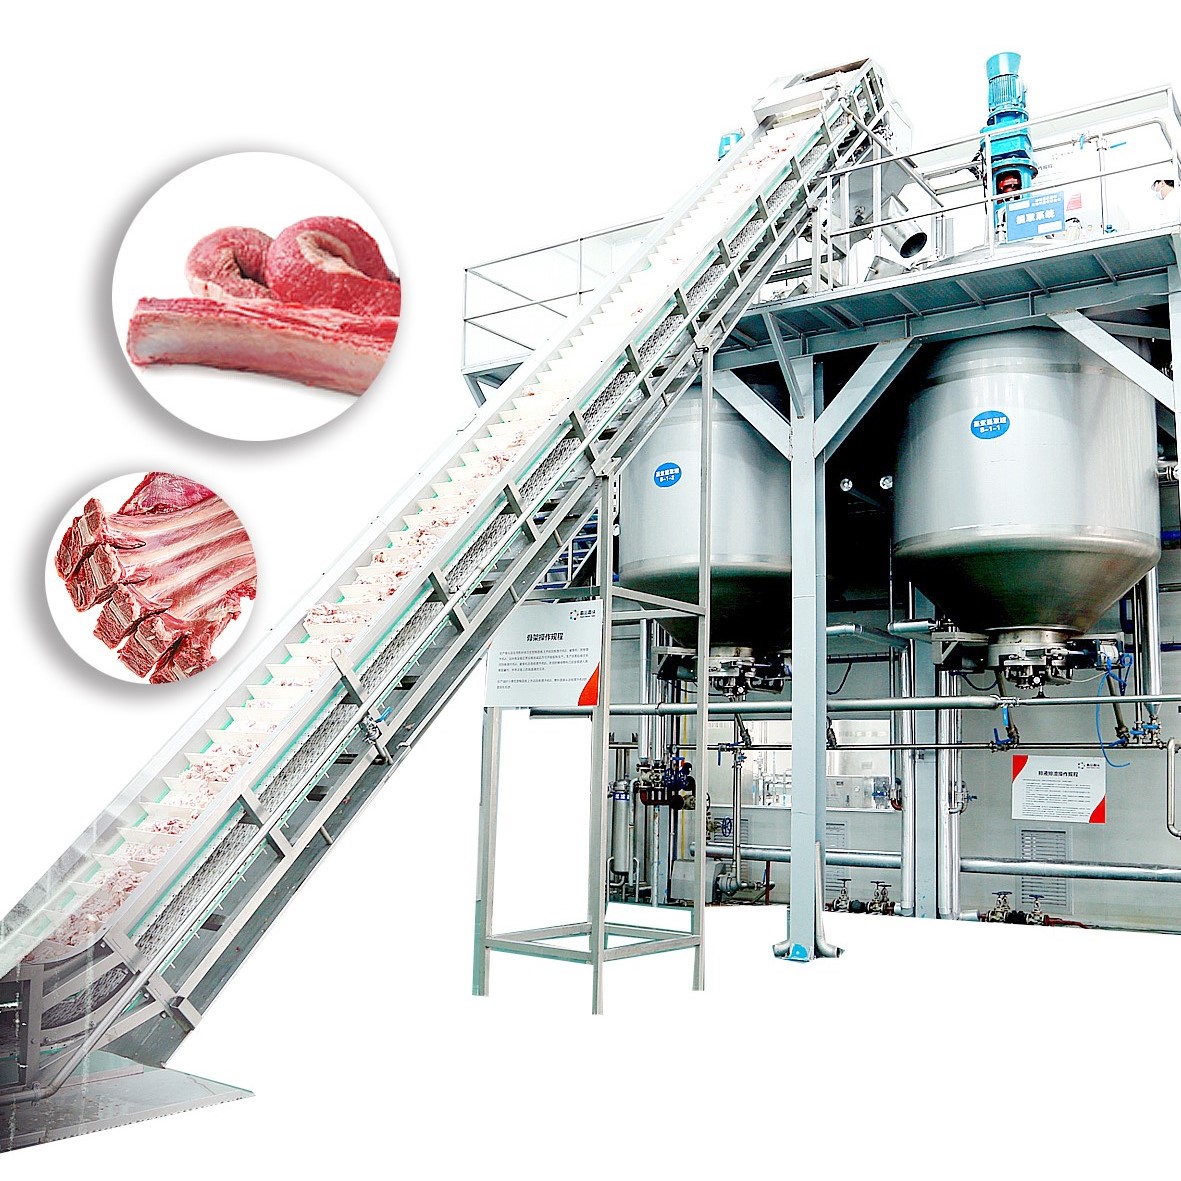 Meat processing plant equipment